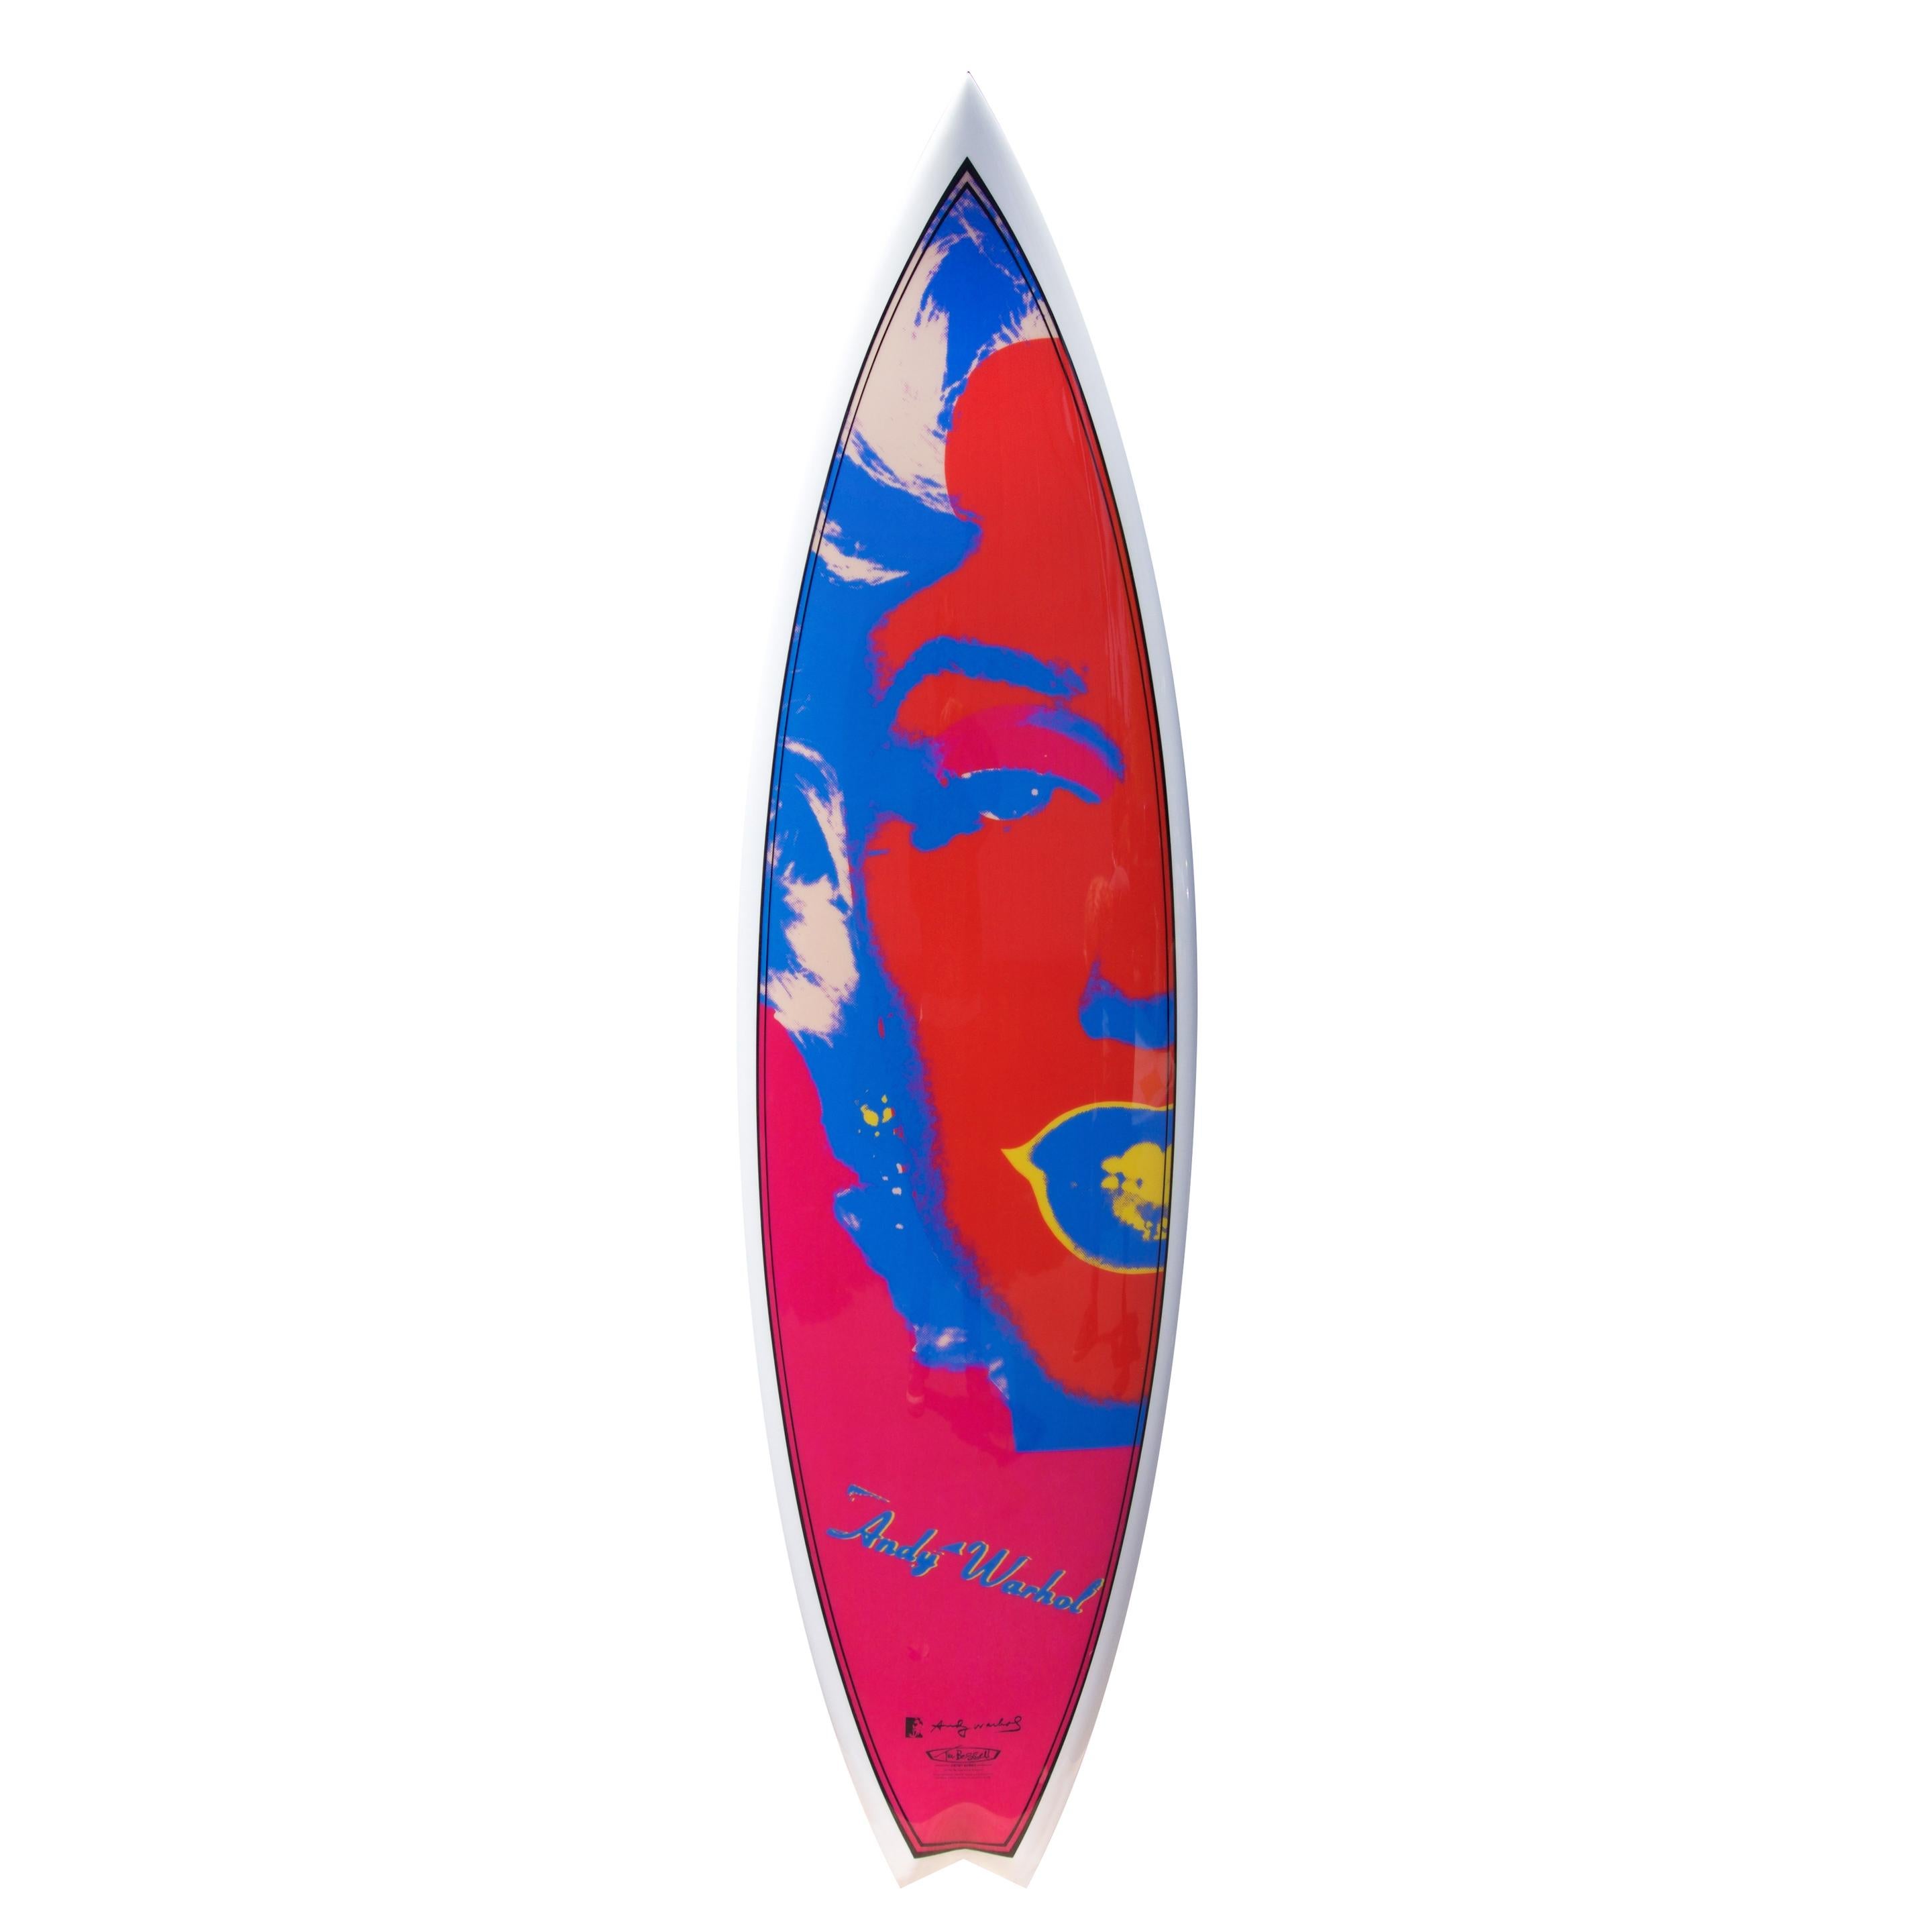 Marilyn, Red/White Surfboard After Andy Warhol